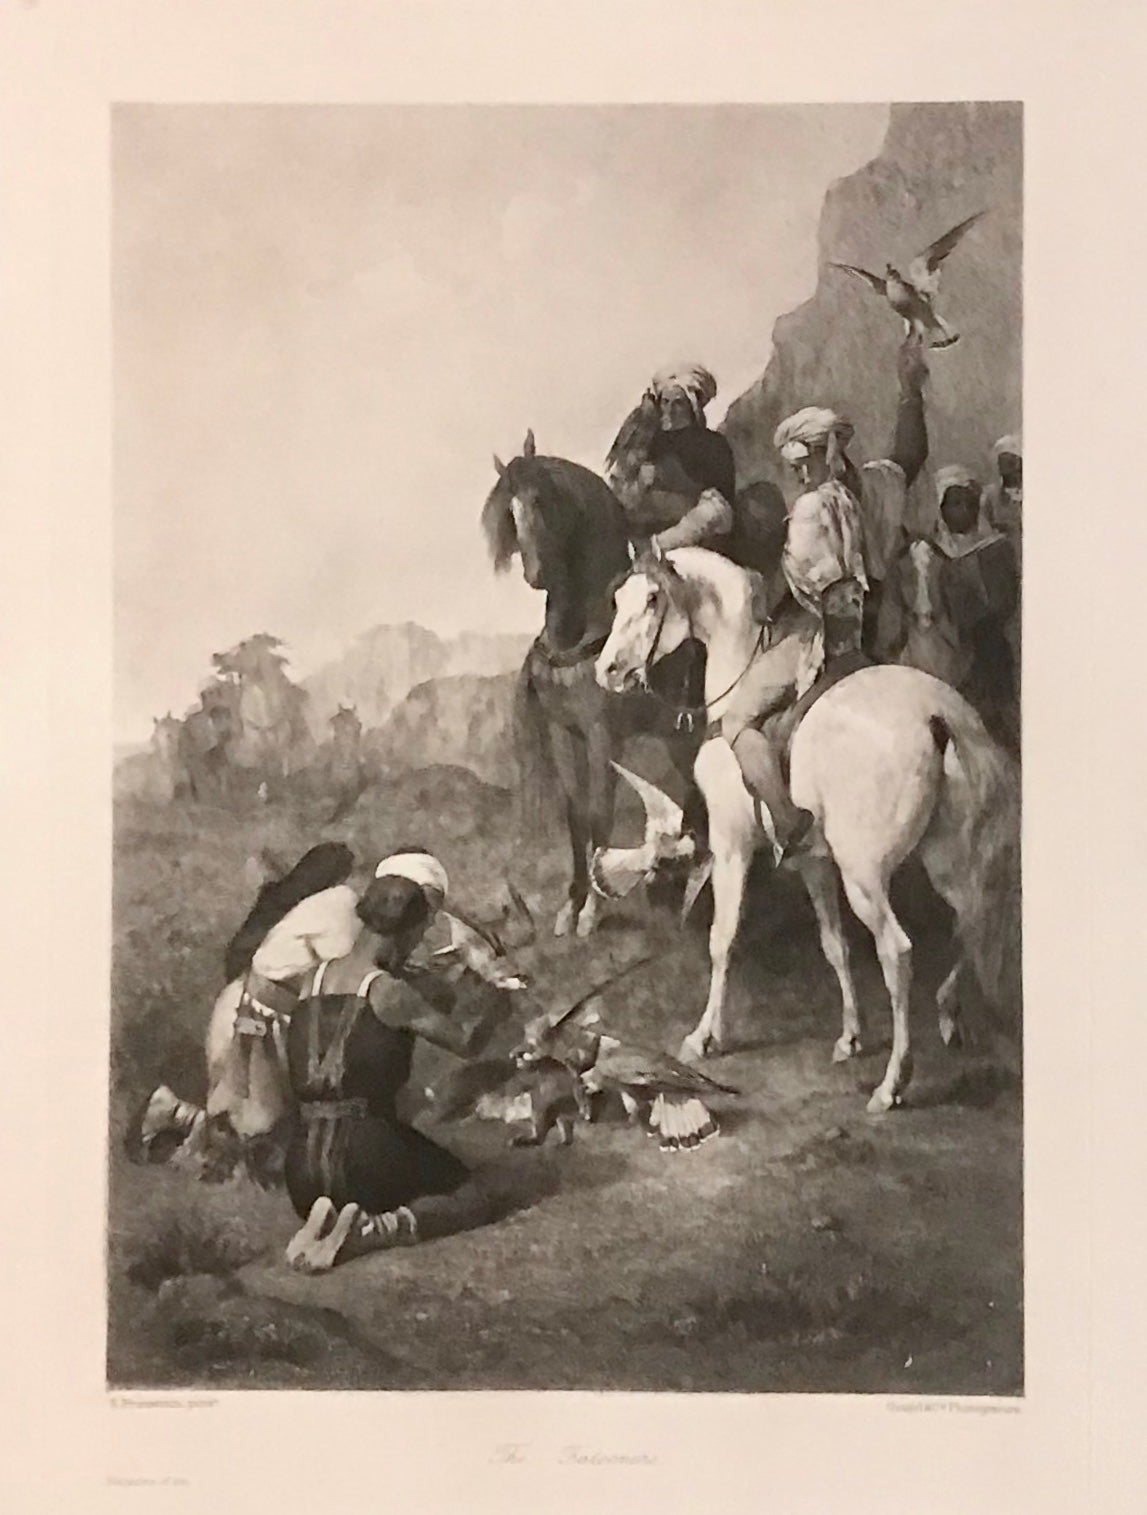 "The Falconers"  Photogravure (Helio gravure) after the painting by Eugene Fromentin (1820 1876).  Falcons have successfully hit a hare. Two Arabian hunters on Arabian horses with falcons on their fists are looking on as the hit hare is secured from two more falcons. Very attractive Arabian hunting scene.